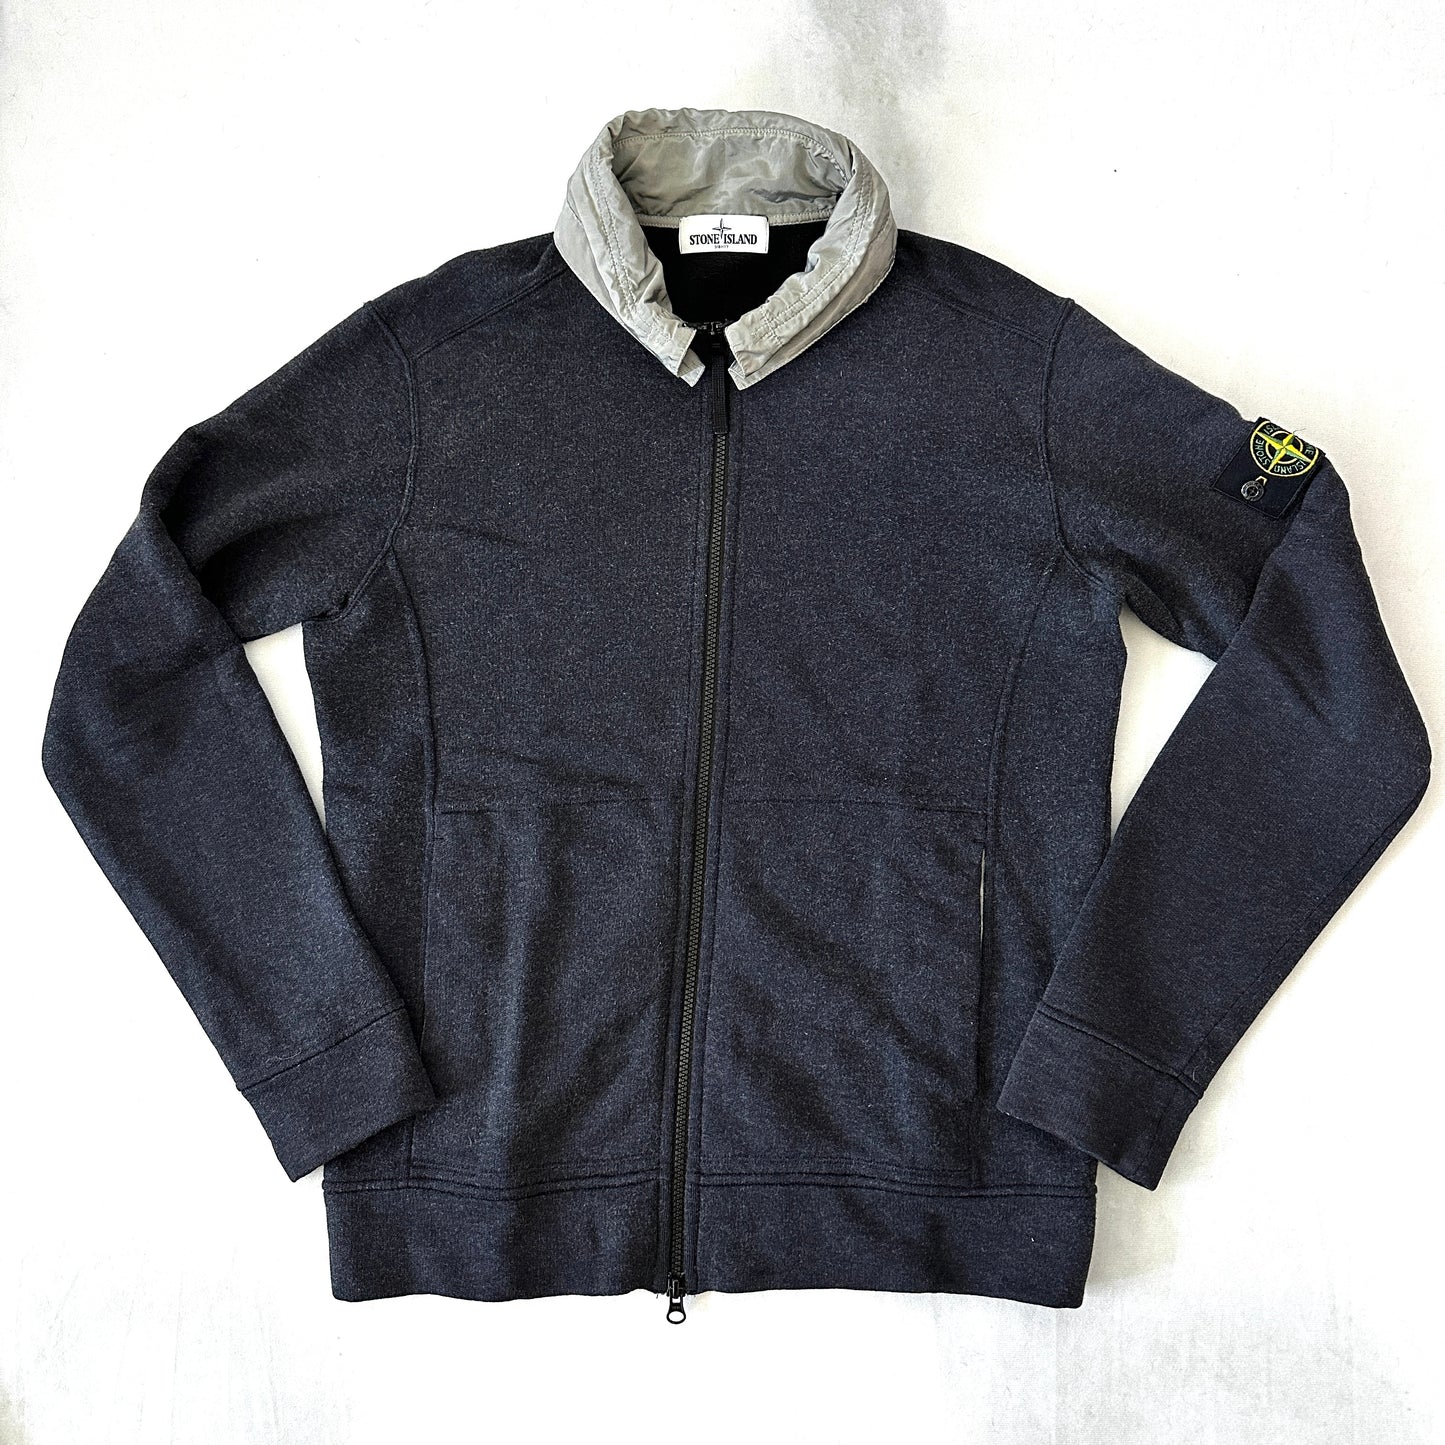 Stone Island 2012 Hooded Zip Jacket - L - Made in Italy